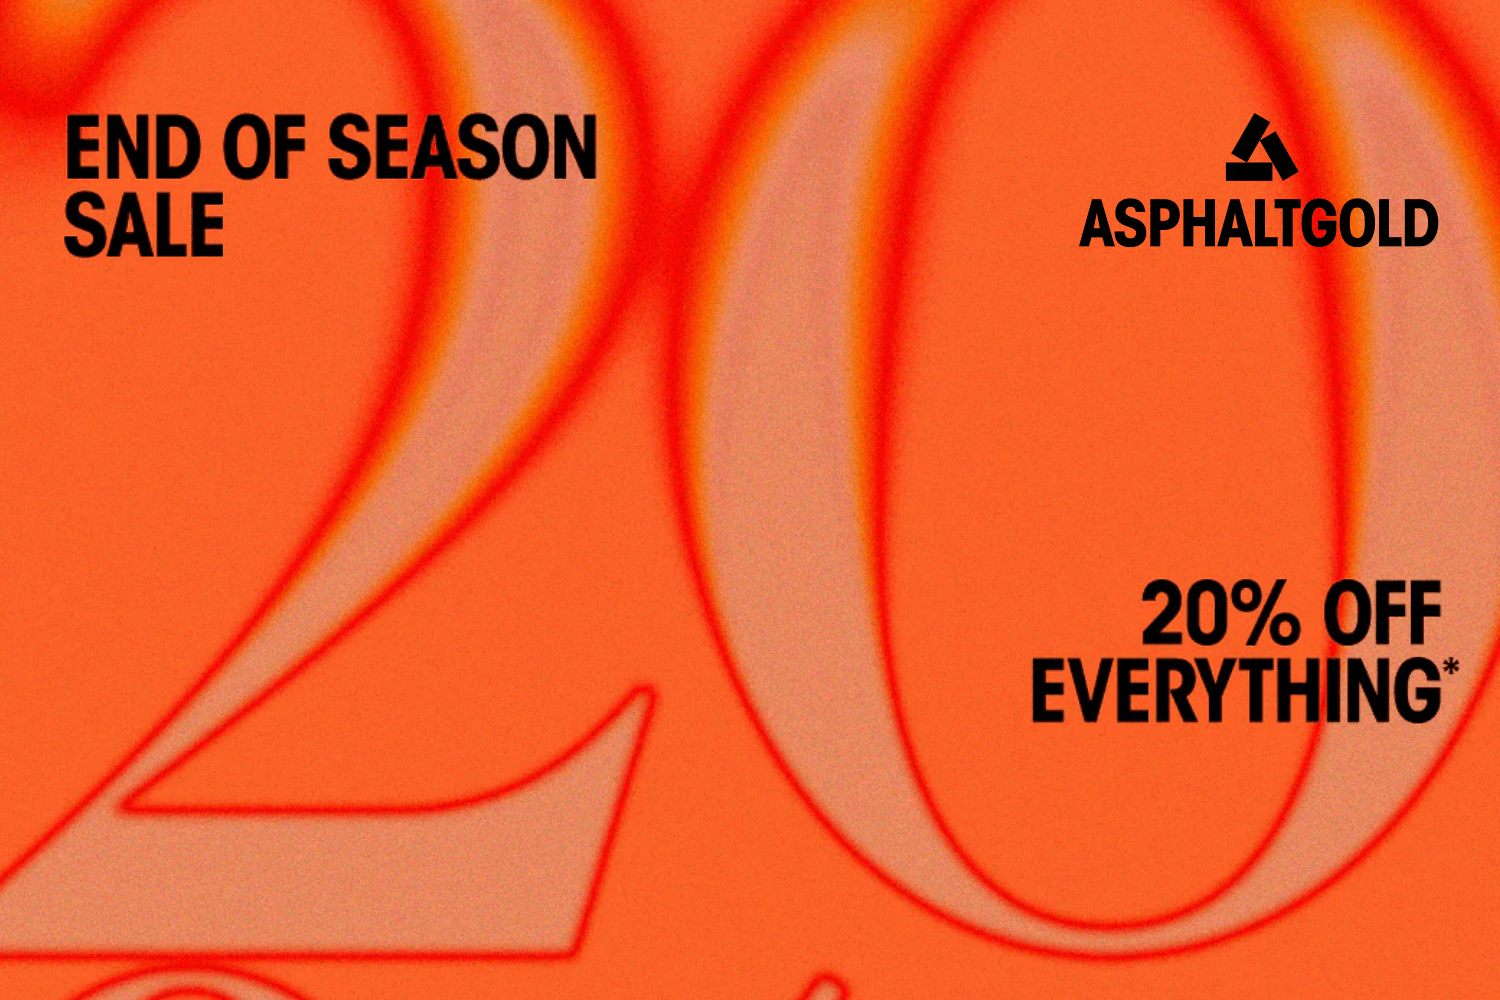 Only for a short time: 20% discount in the Asphaltgold End of Season Sale